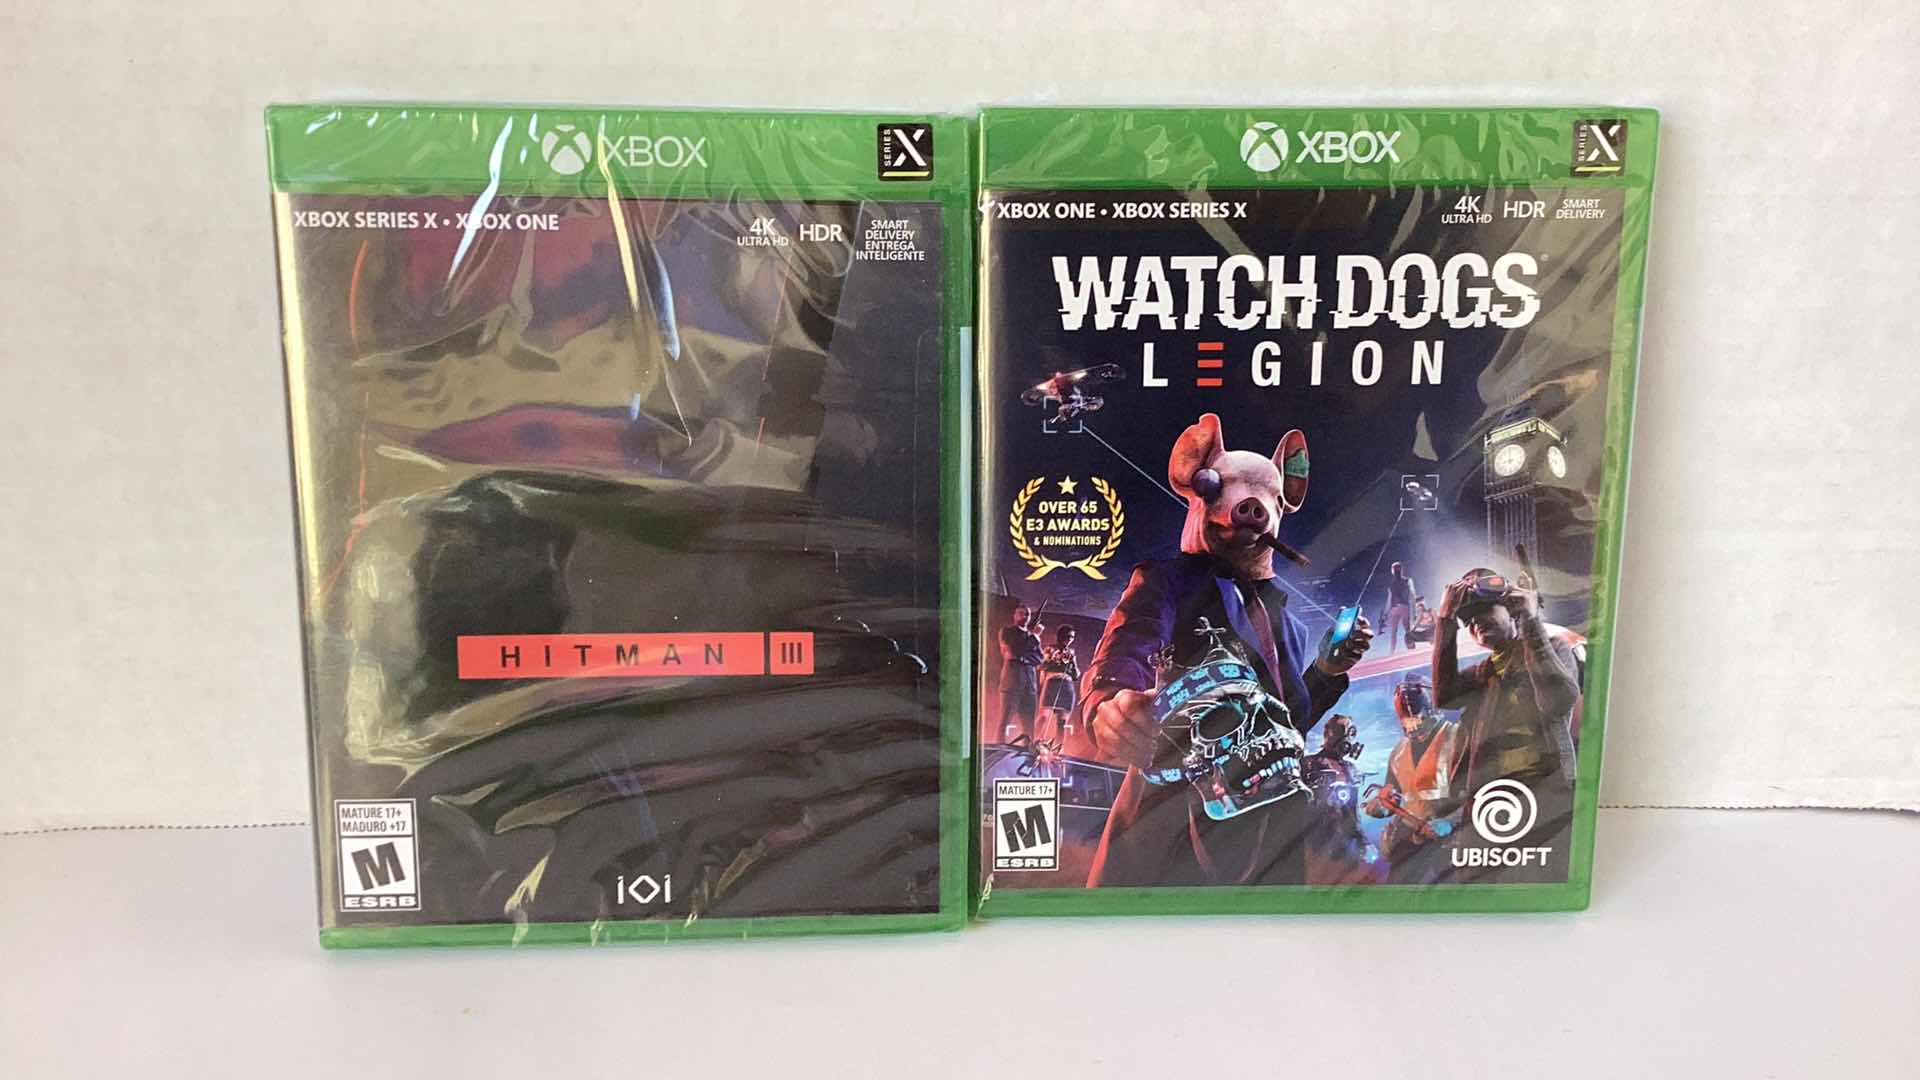 Photo 1 of 2 NEW X-BOX GAMES: HITMAN III AND WATCH DOGS LEGION